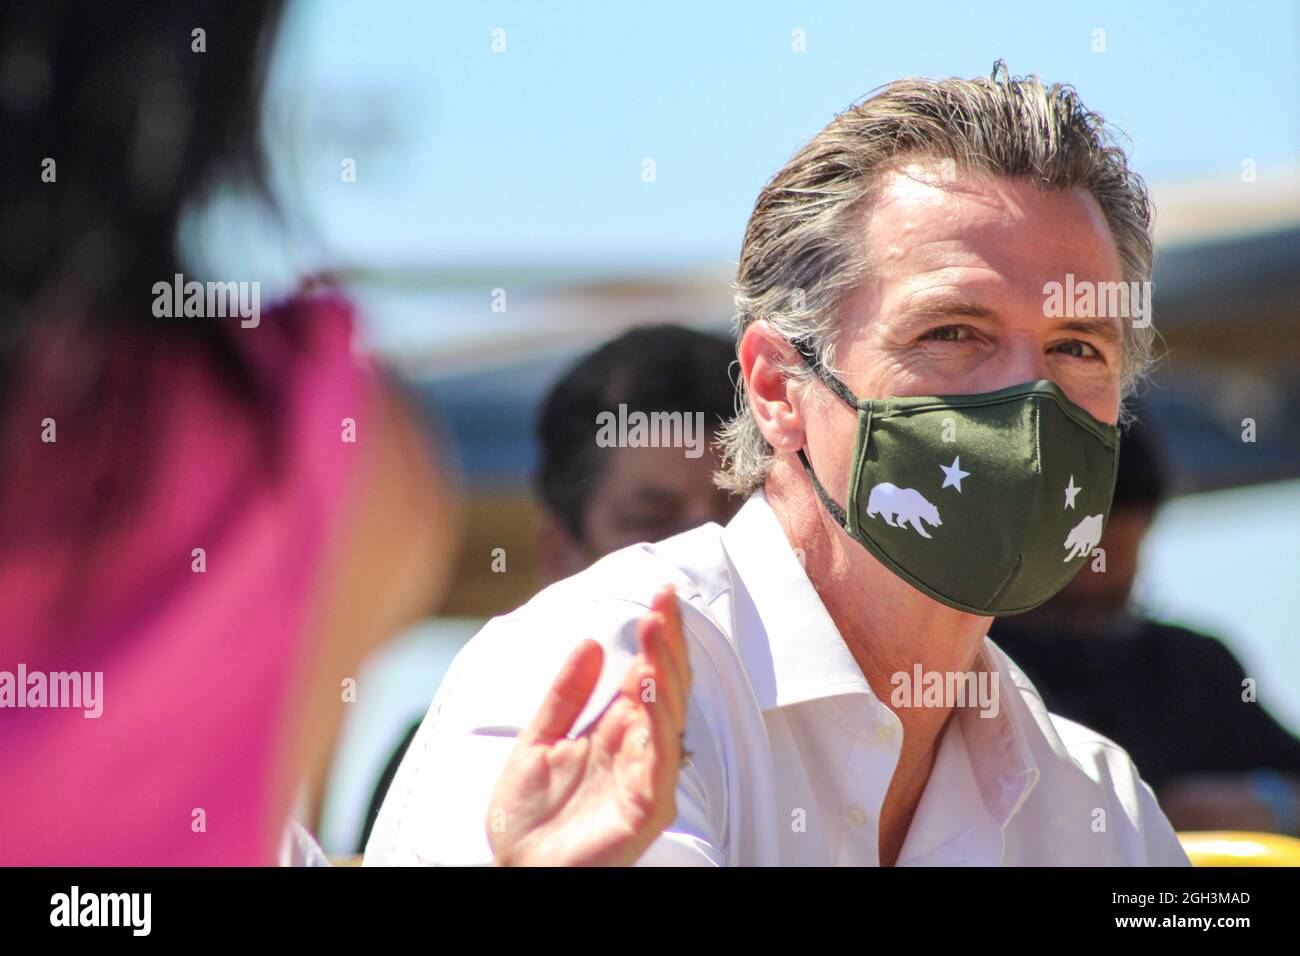 Los Angeles, USA. 04th Sep, 2021. Governor Gavin Newsom at a 'Vote No' rally in Los Angeles, California on September 4, 2021. (Photo by Conor Duffy/Sipa USA) Credit: Sipa USA/Alamy Live News Stock Photo